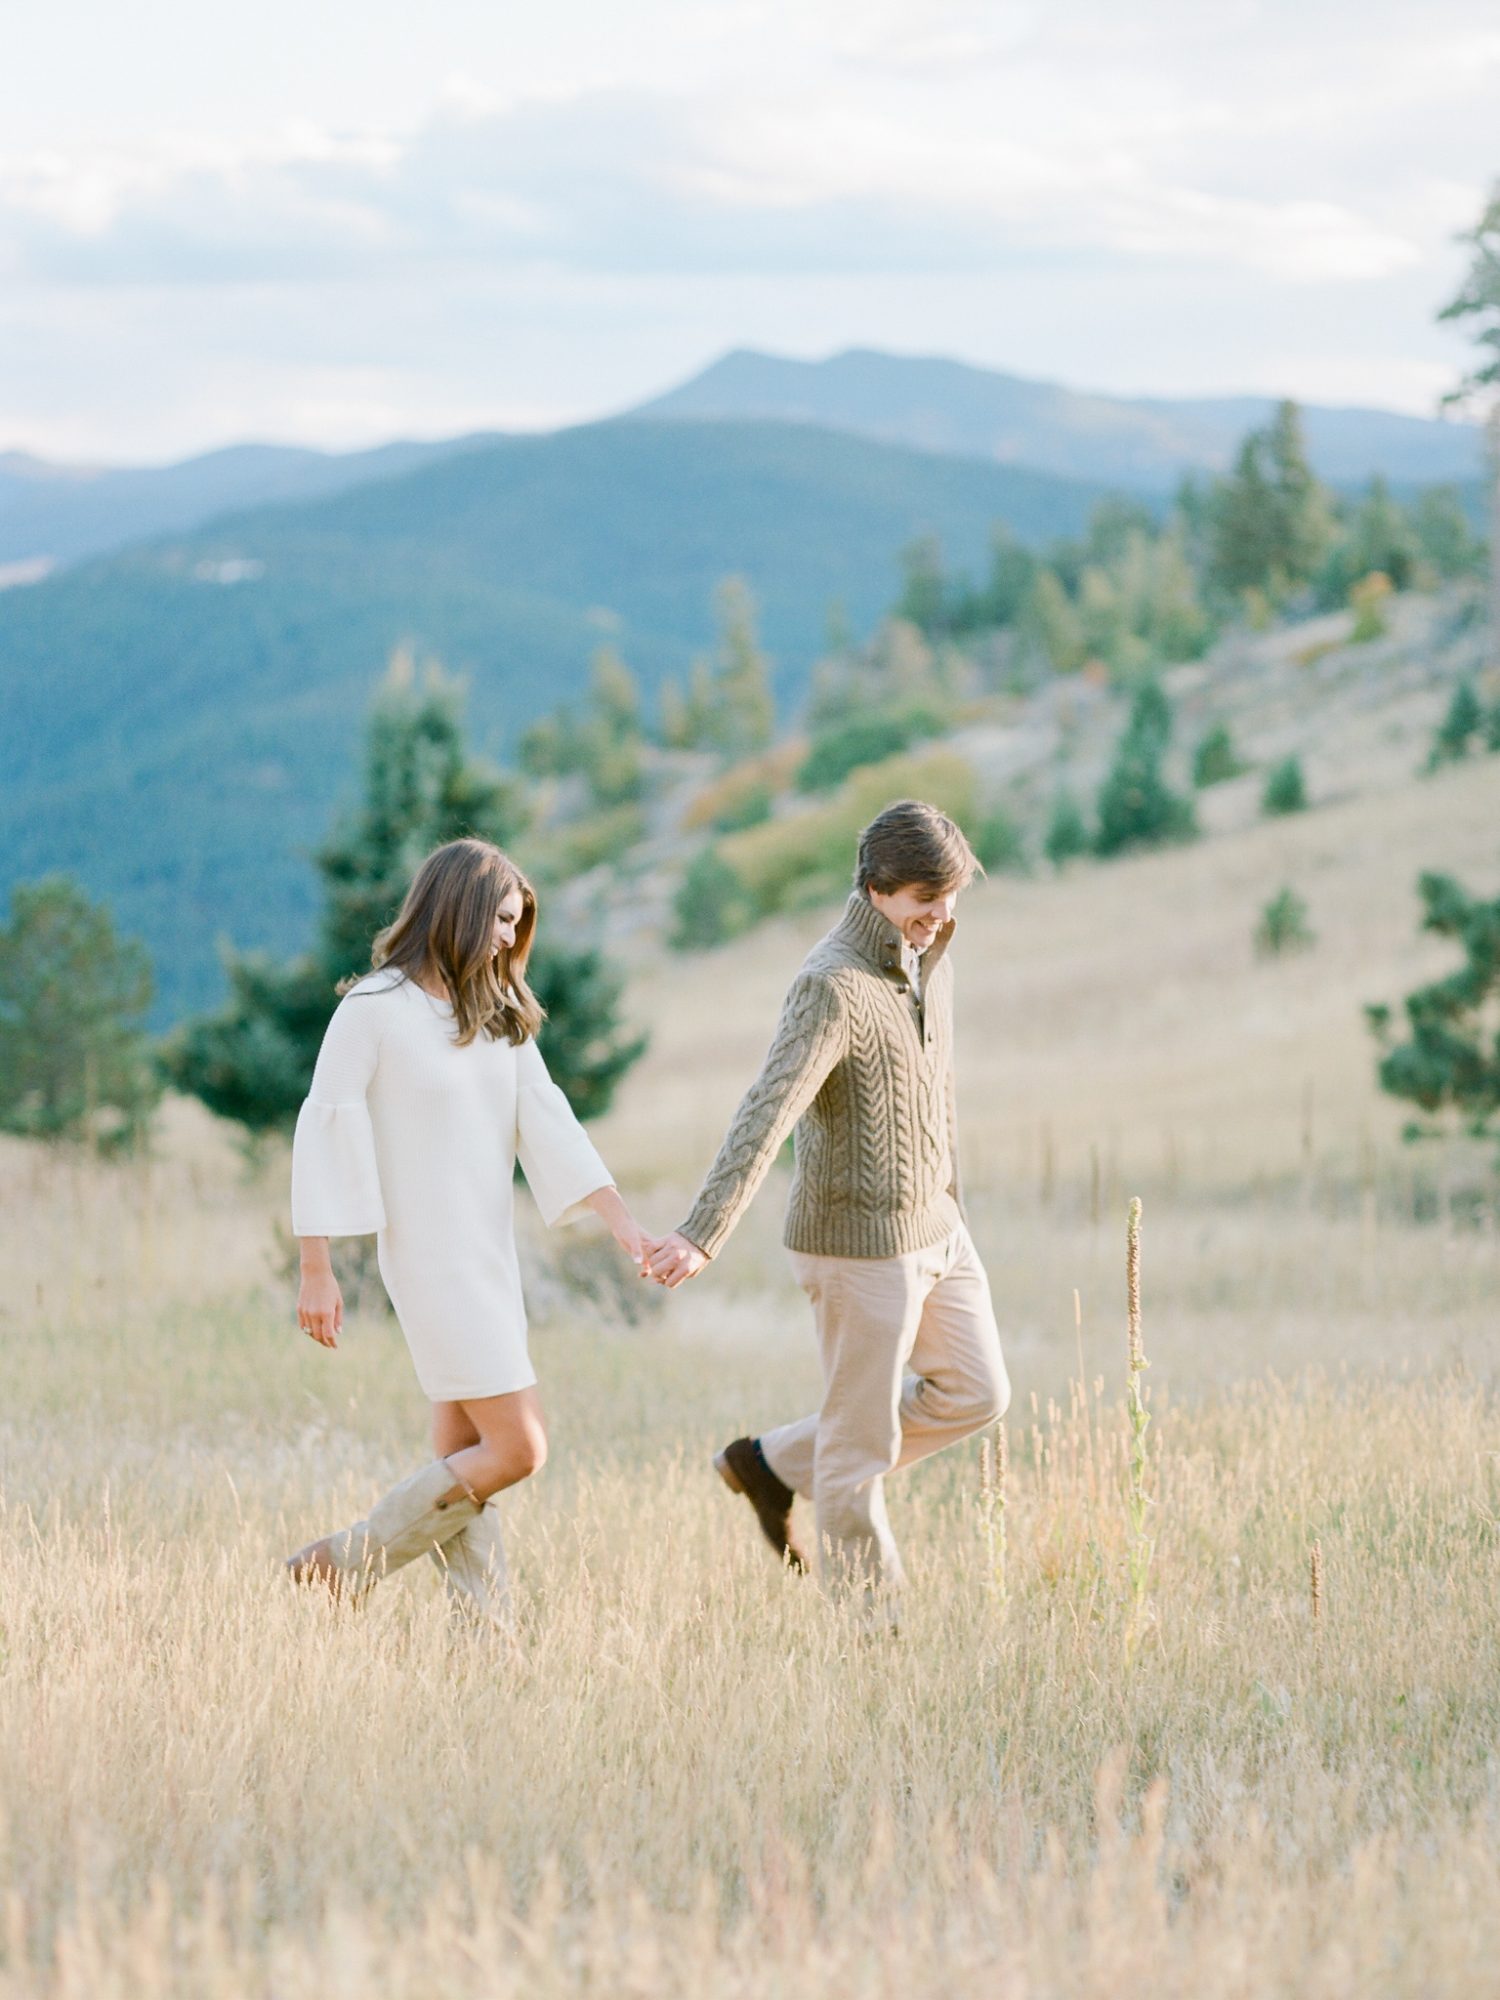 Outdoor Mountain Engagement Session by Rachel Havel